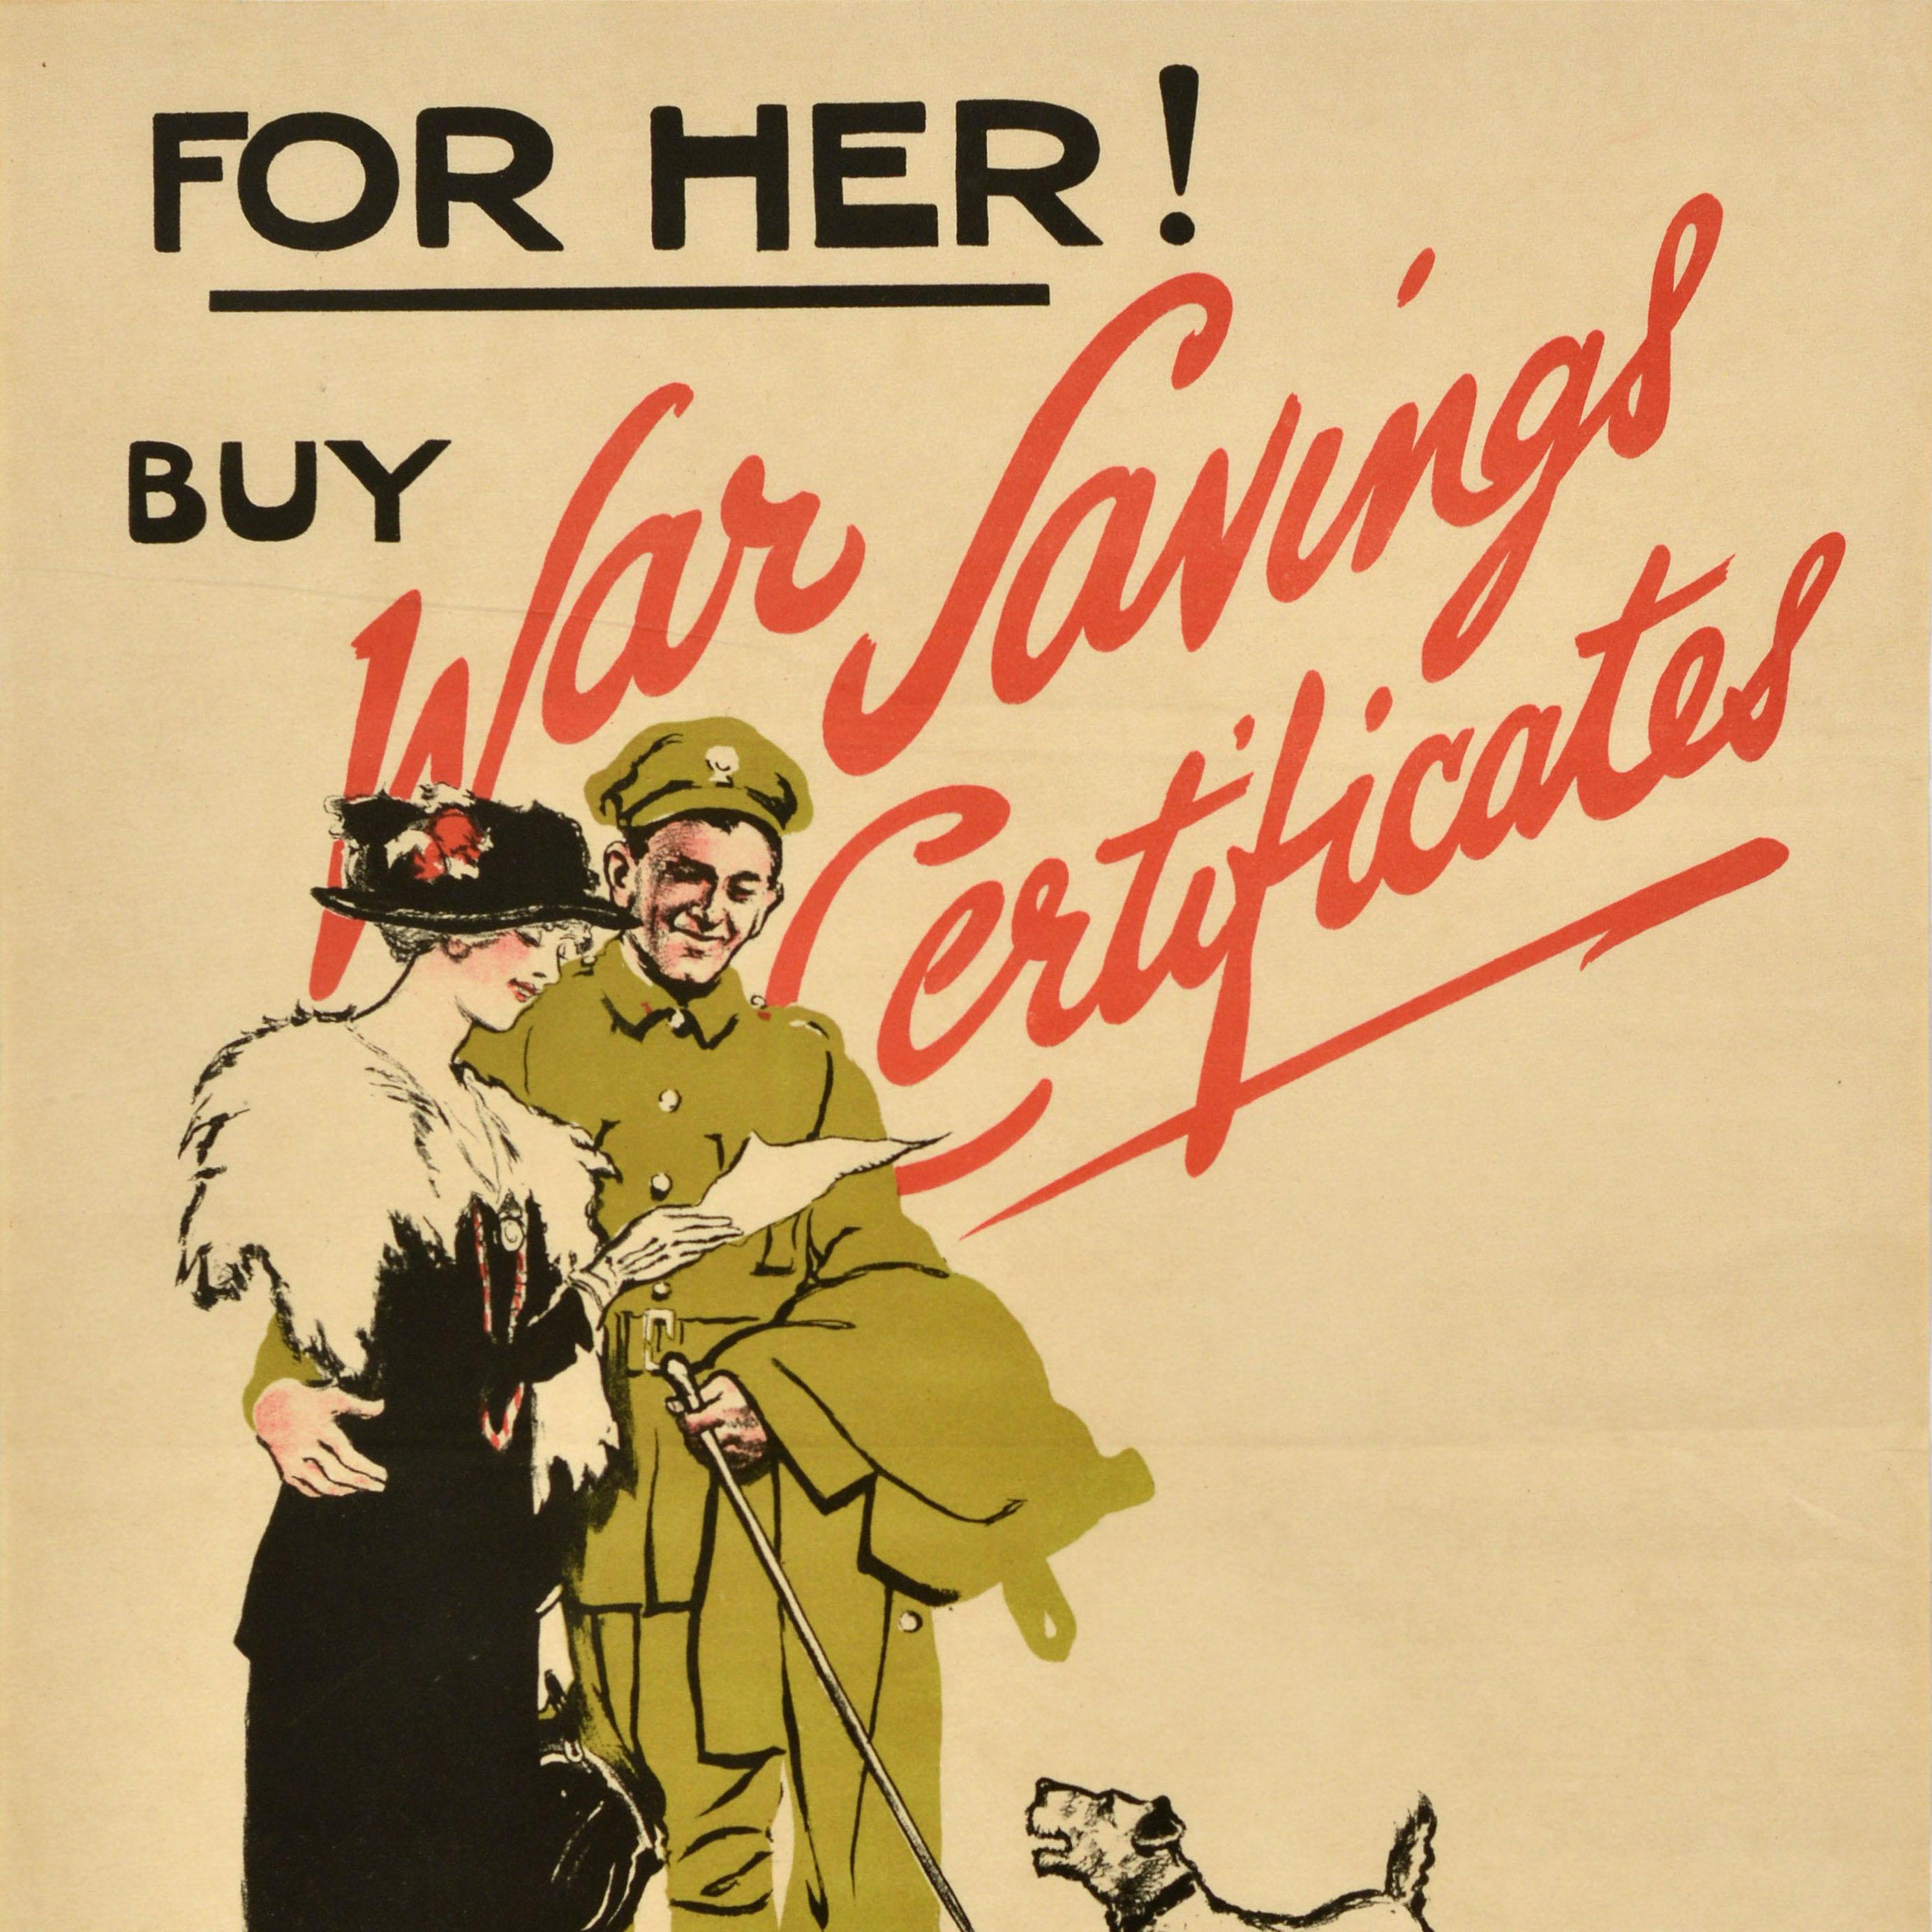 Original antique World War One war bonds poster - For her! Buy War Savings Certificates £1 for 15'6 in 5 years You can get your money back any time - featuring an illustration of an elegant lady in a fashionable long black dress with flowers on her